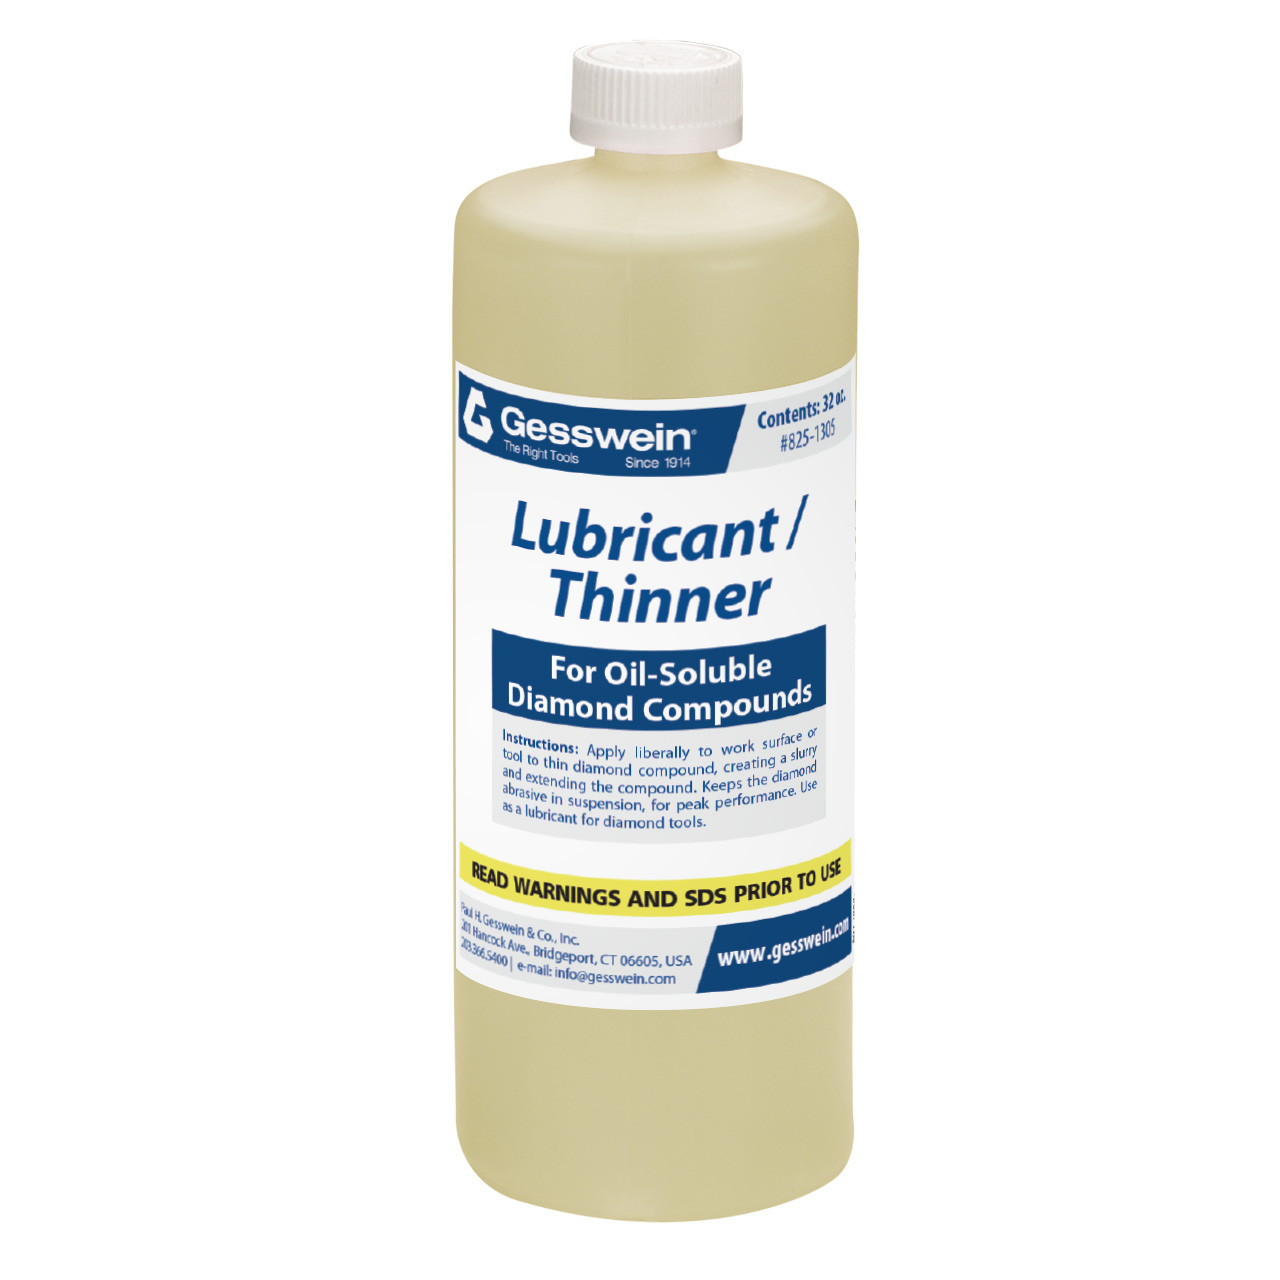 Lubricant/Thinner - Oil-Soluble, 32 oz. Bottle